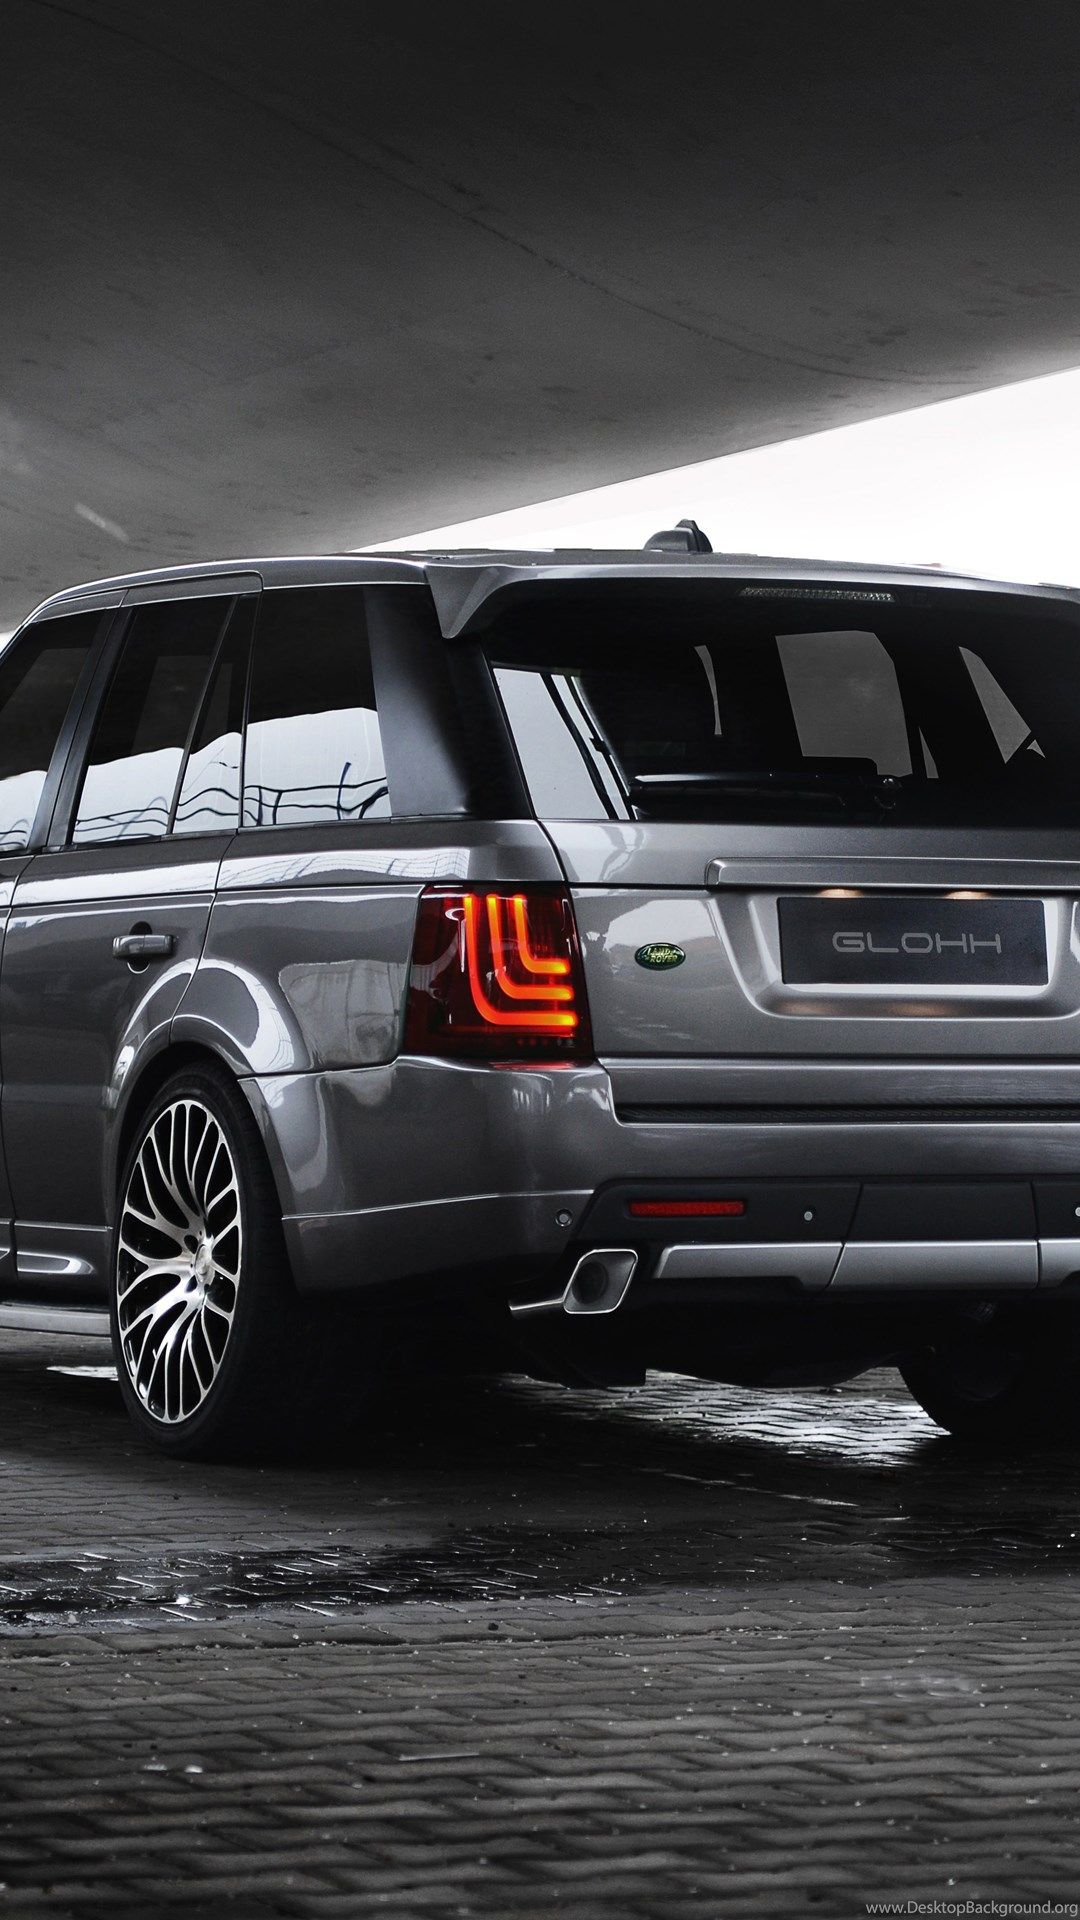 Range Rover hd wallpaper for iPhone 7